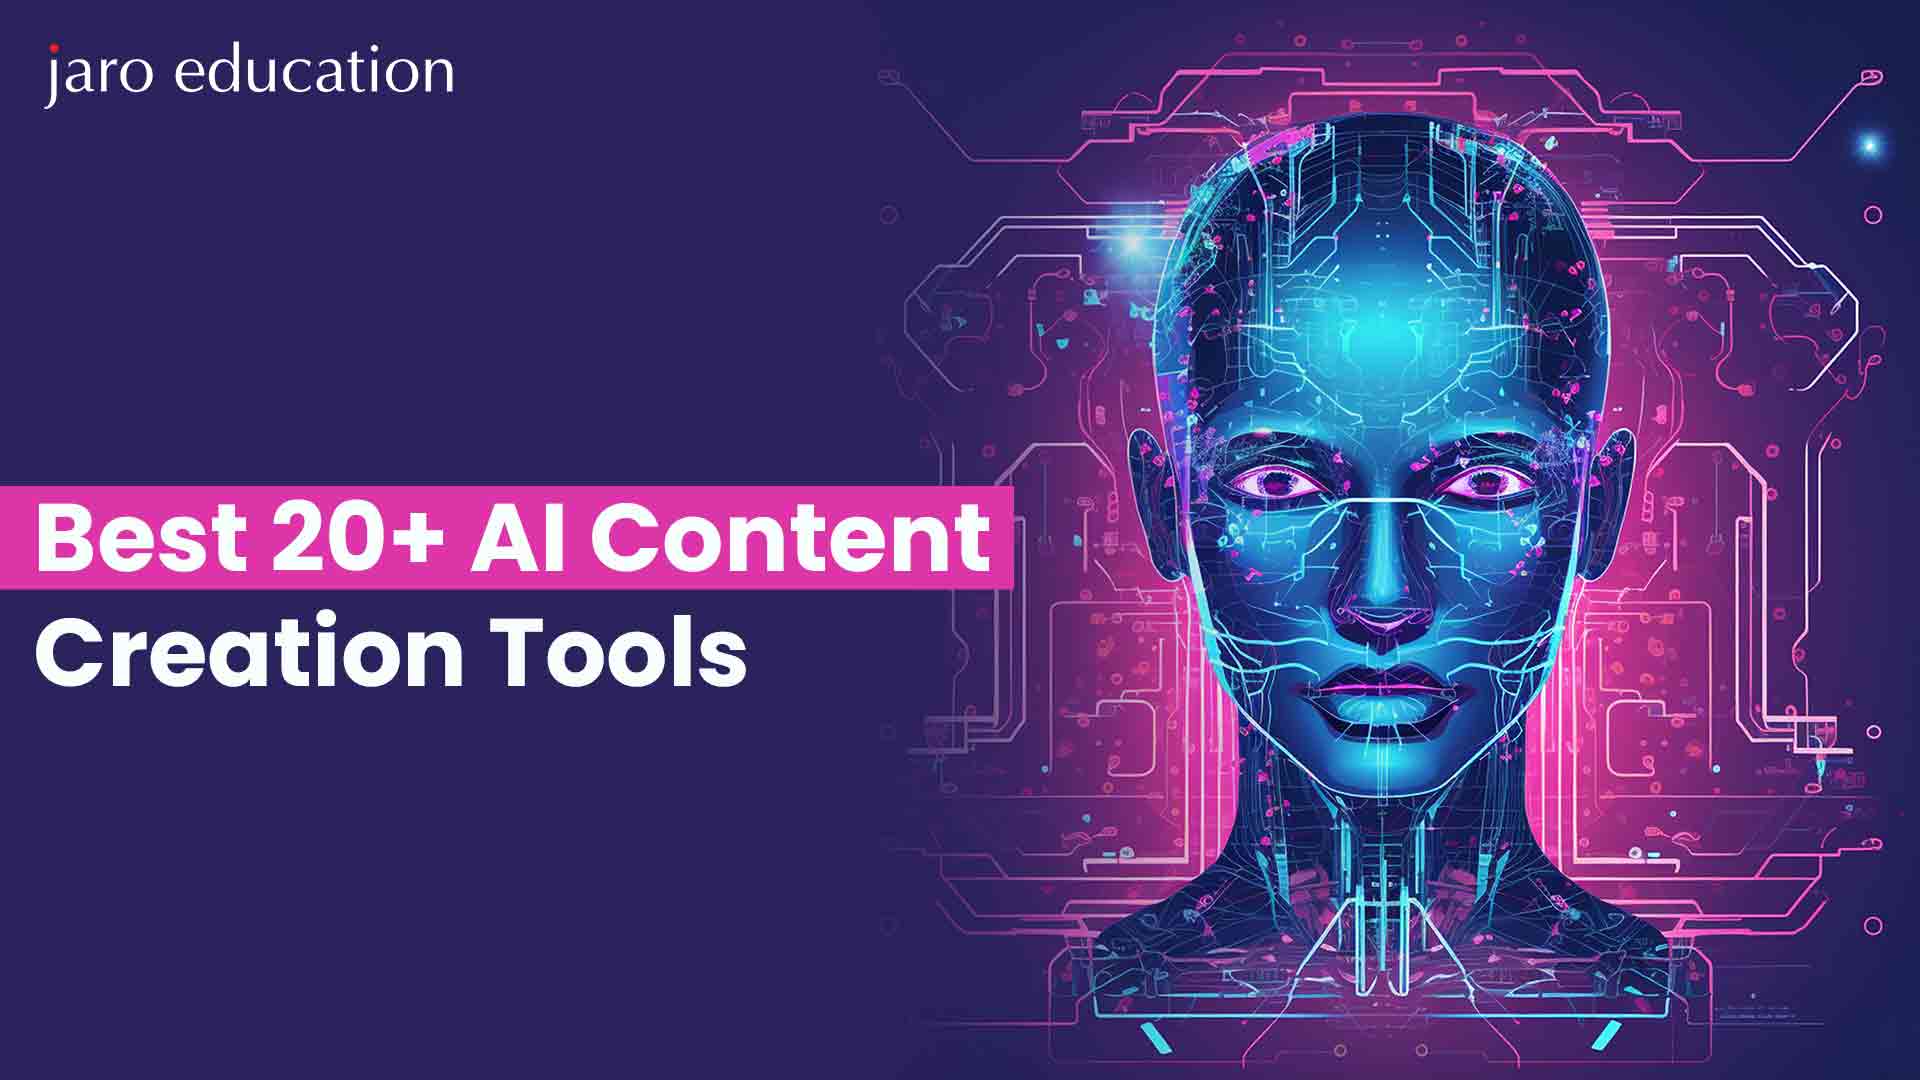 Best 20+ AI Content Creation Tools